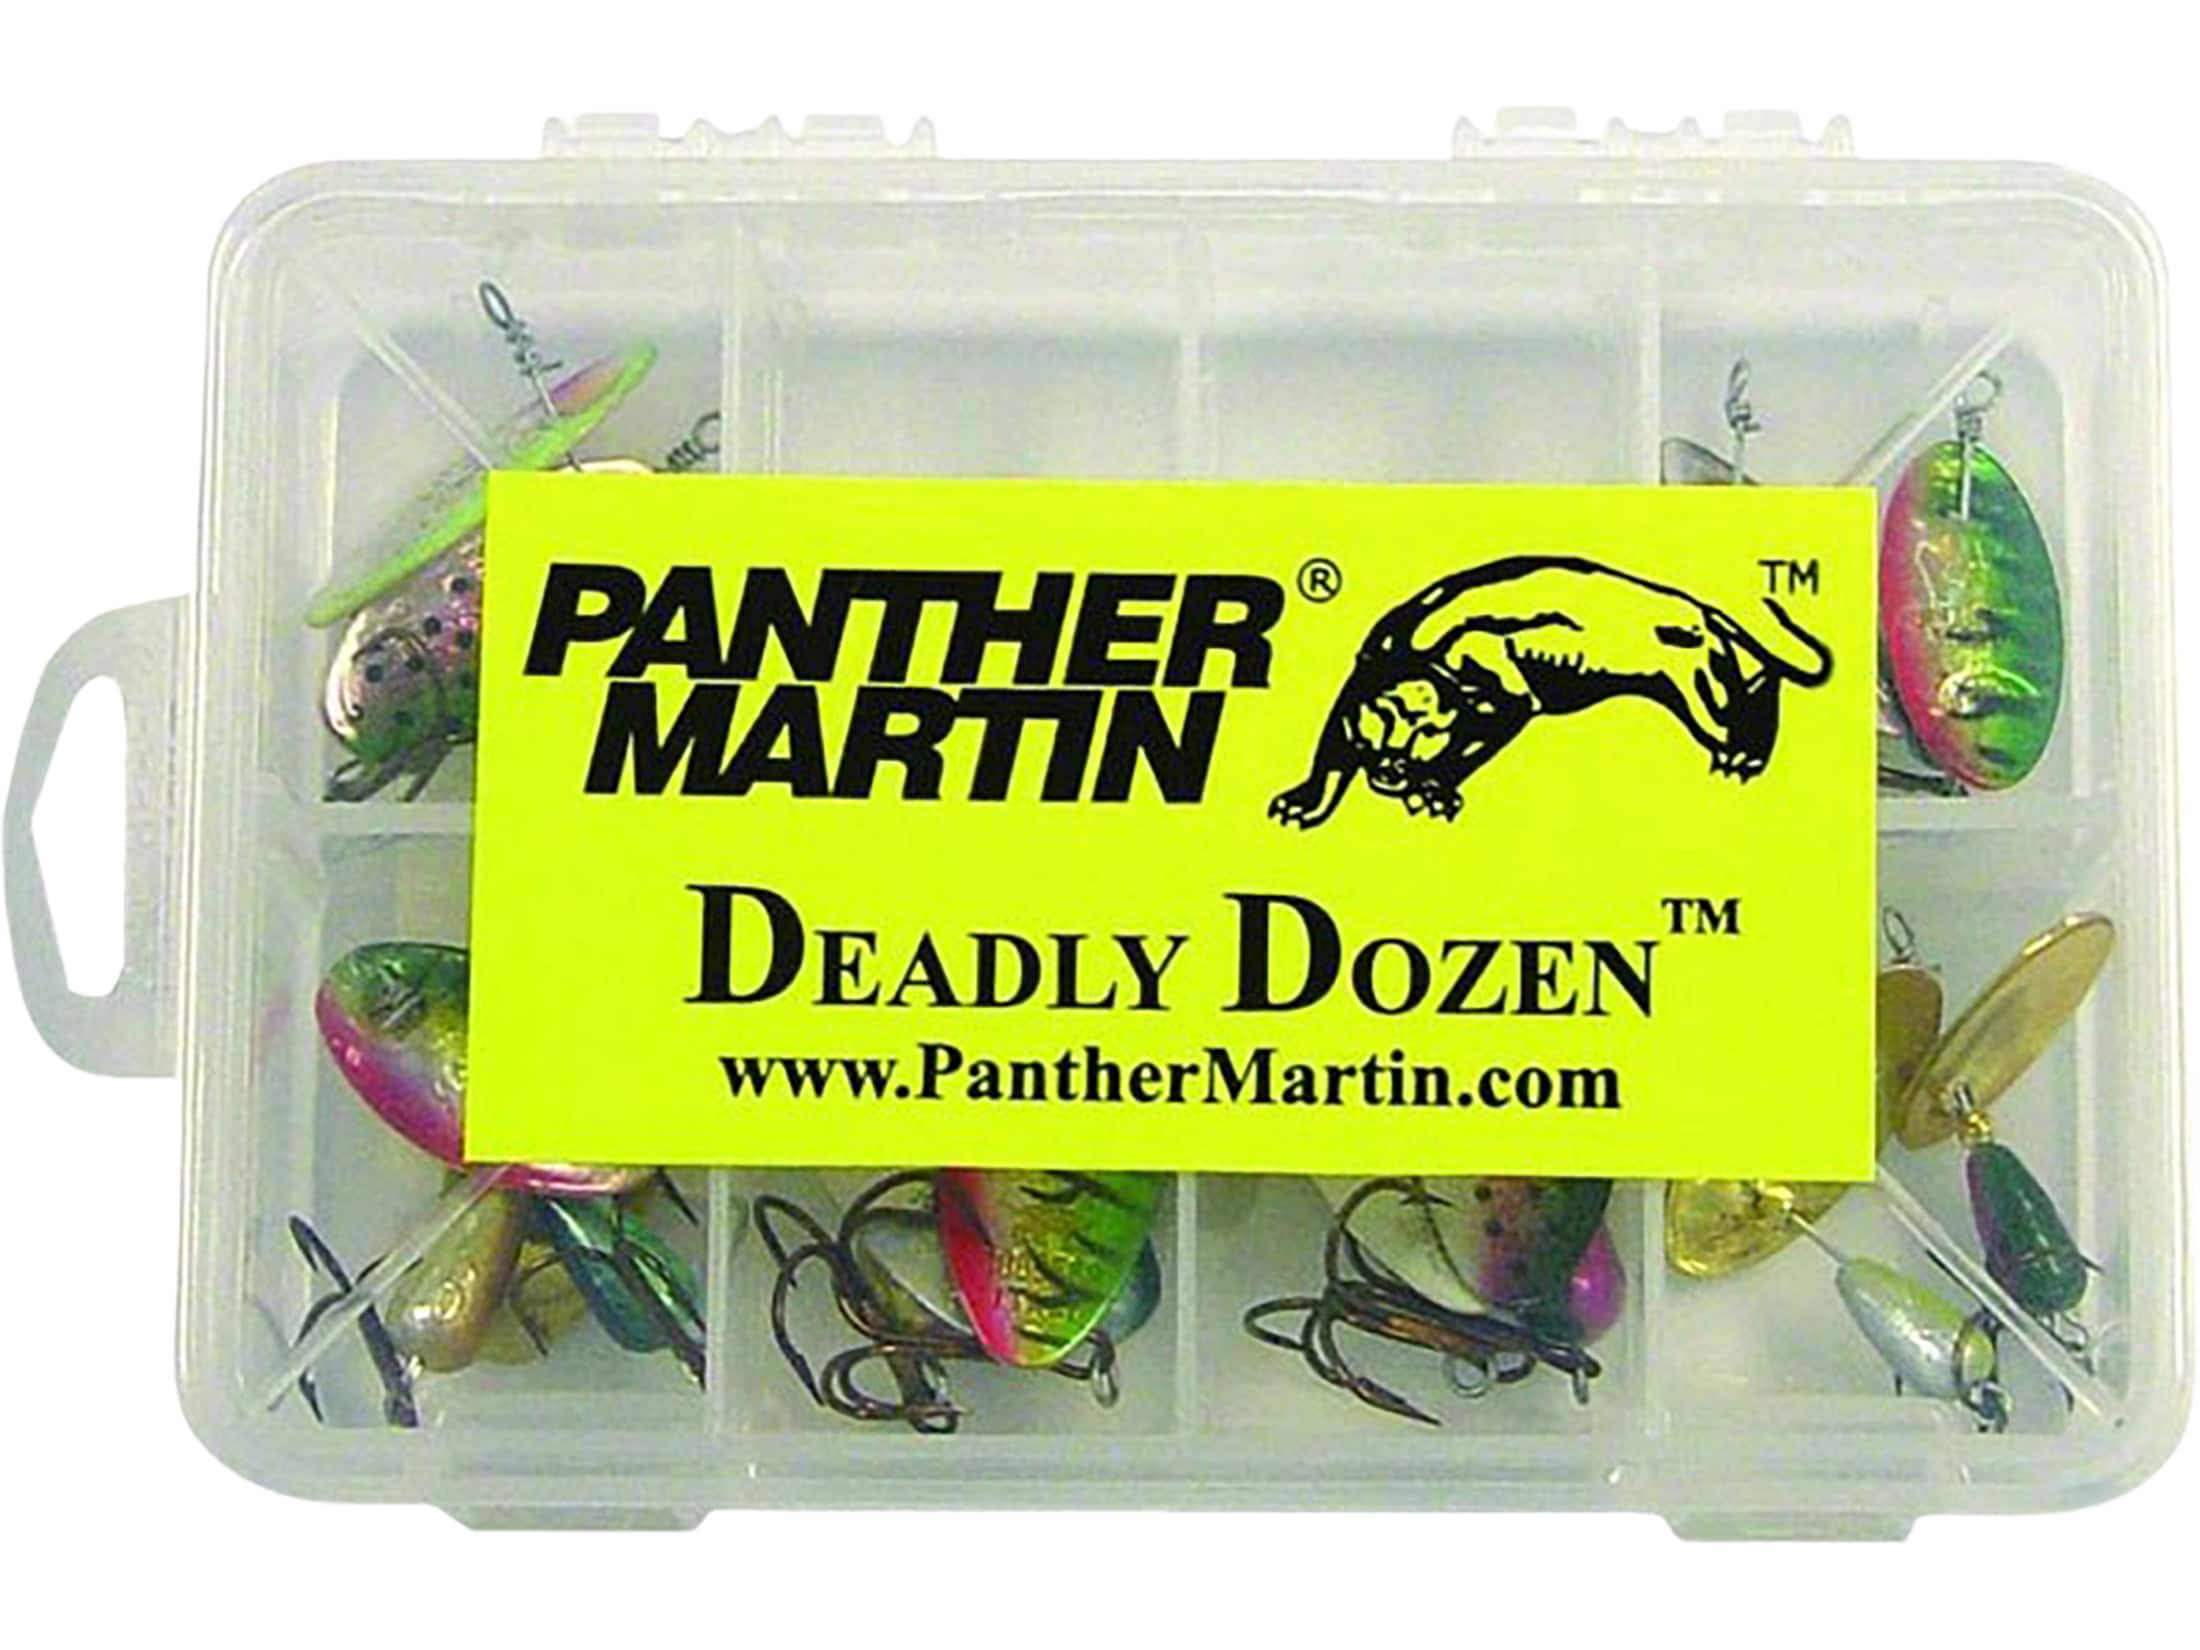 3 packs panther martin trout spinners deadly 6-pack size 2 & 4